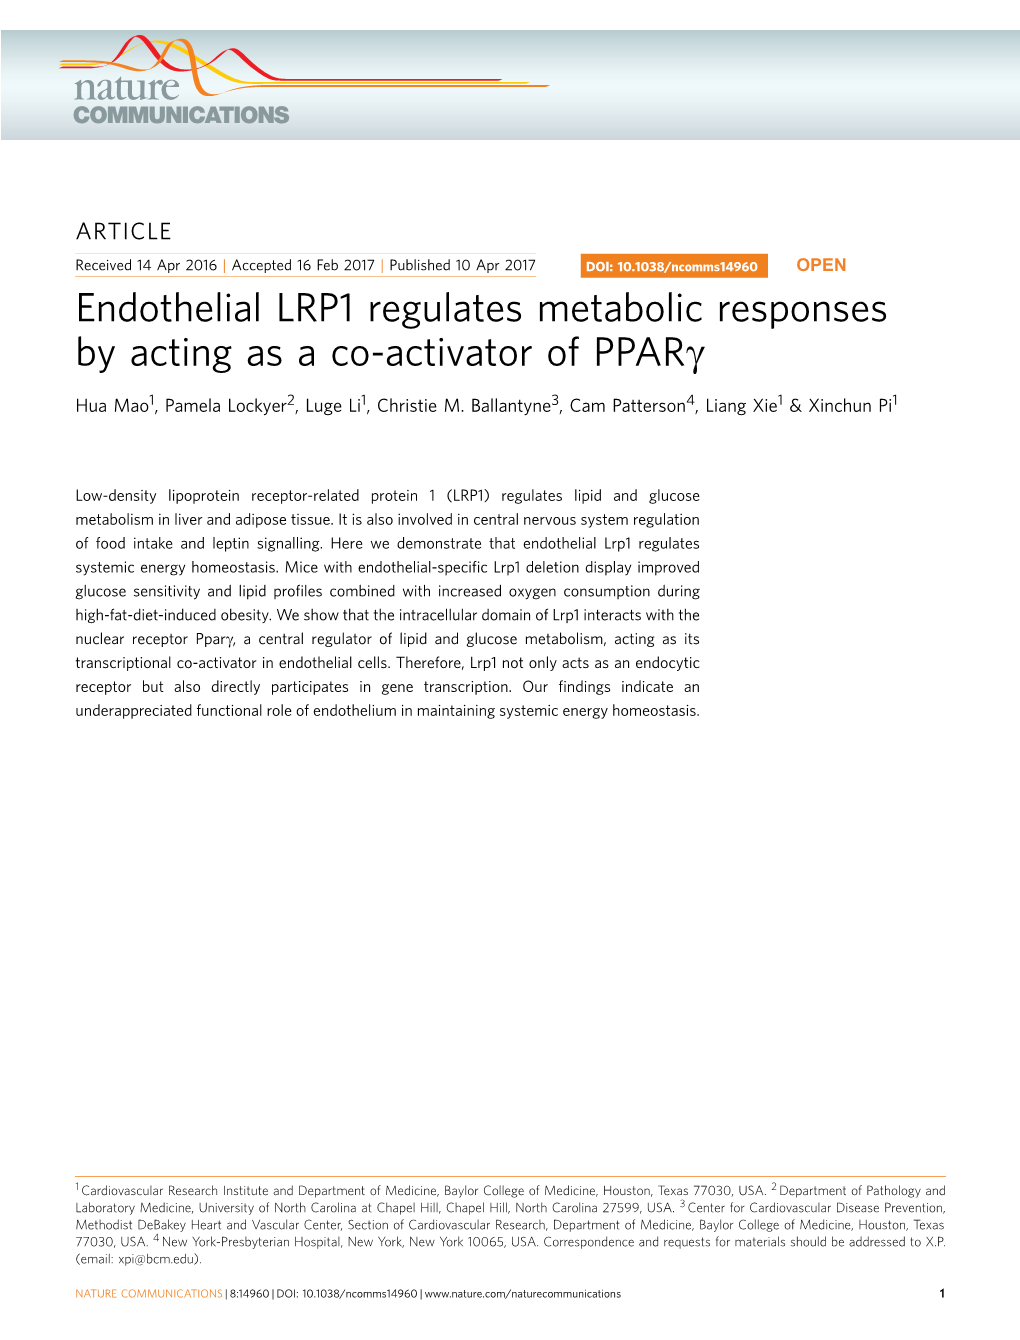 Endothelial LRP1 Regulates Metabolic Responses by Acting As a Co-Activator of Pparg